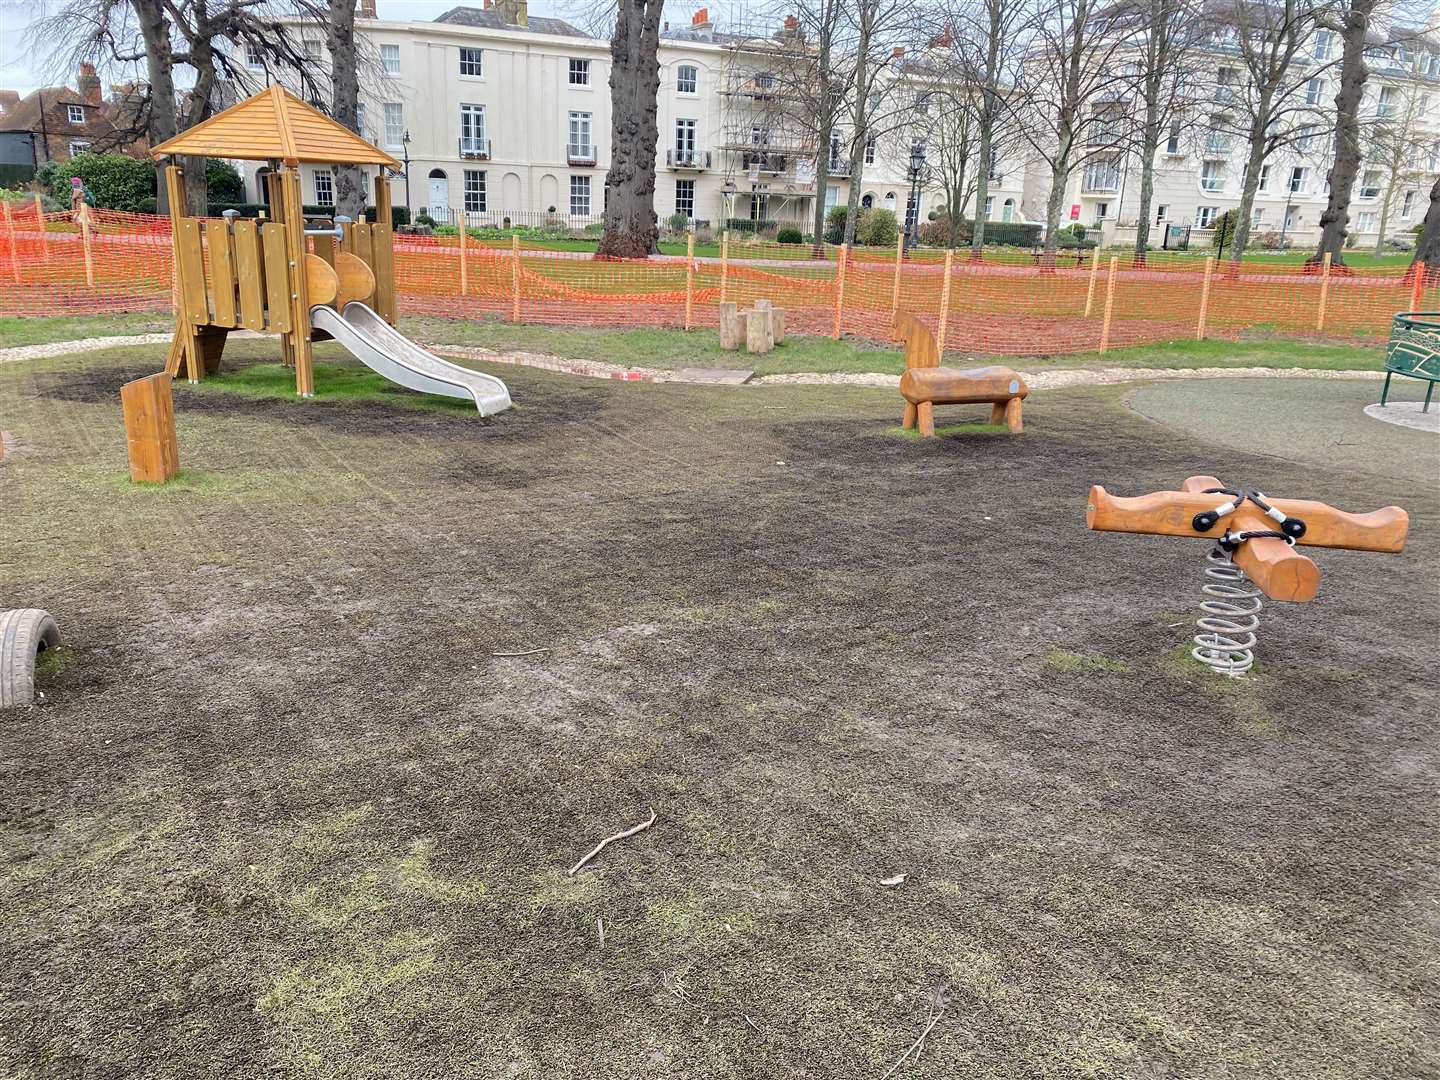 The area features a range of play equipment including swings, a seesaw, a roundabout and slide, all open to use by children up to seven years in age